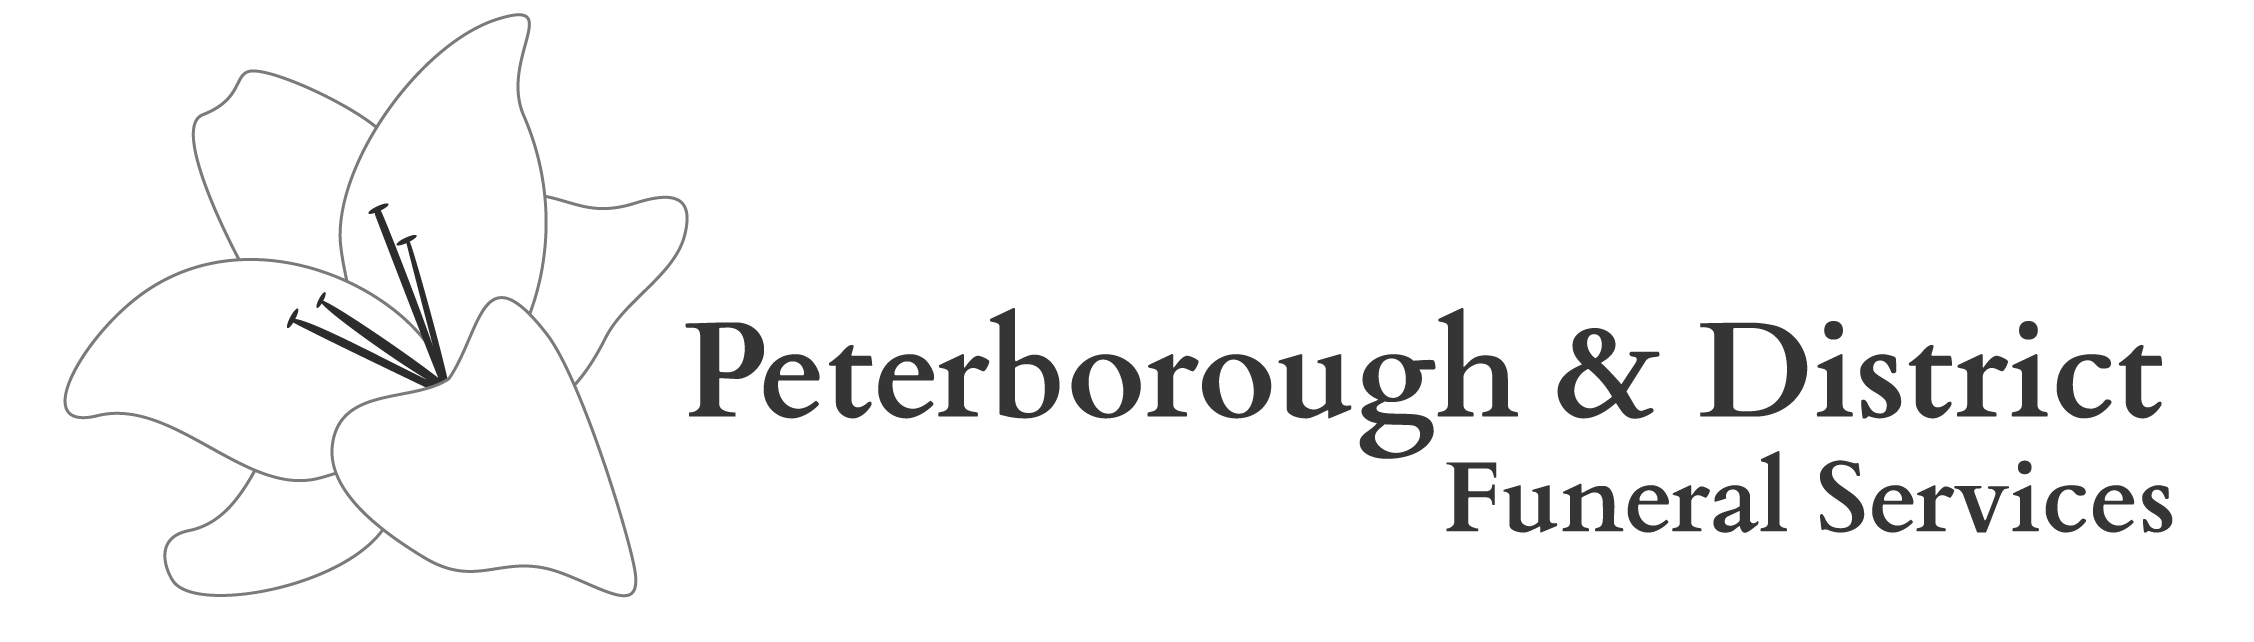 Peterborough & District Funeral Services